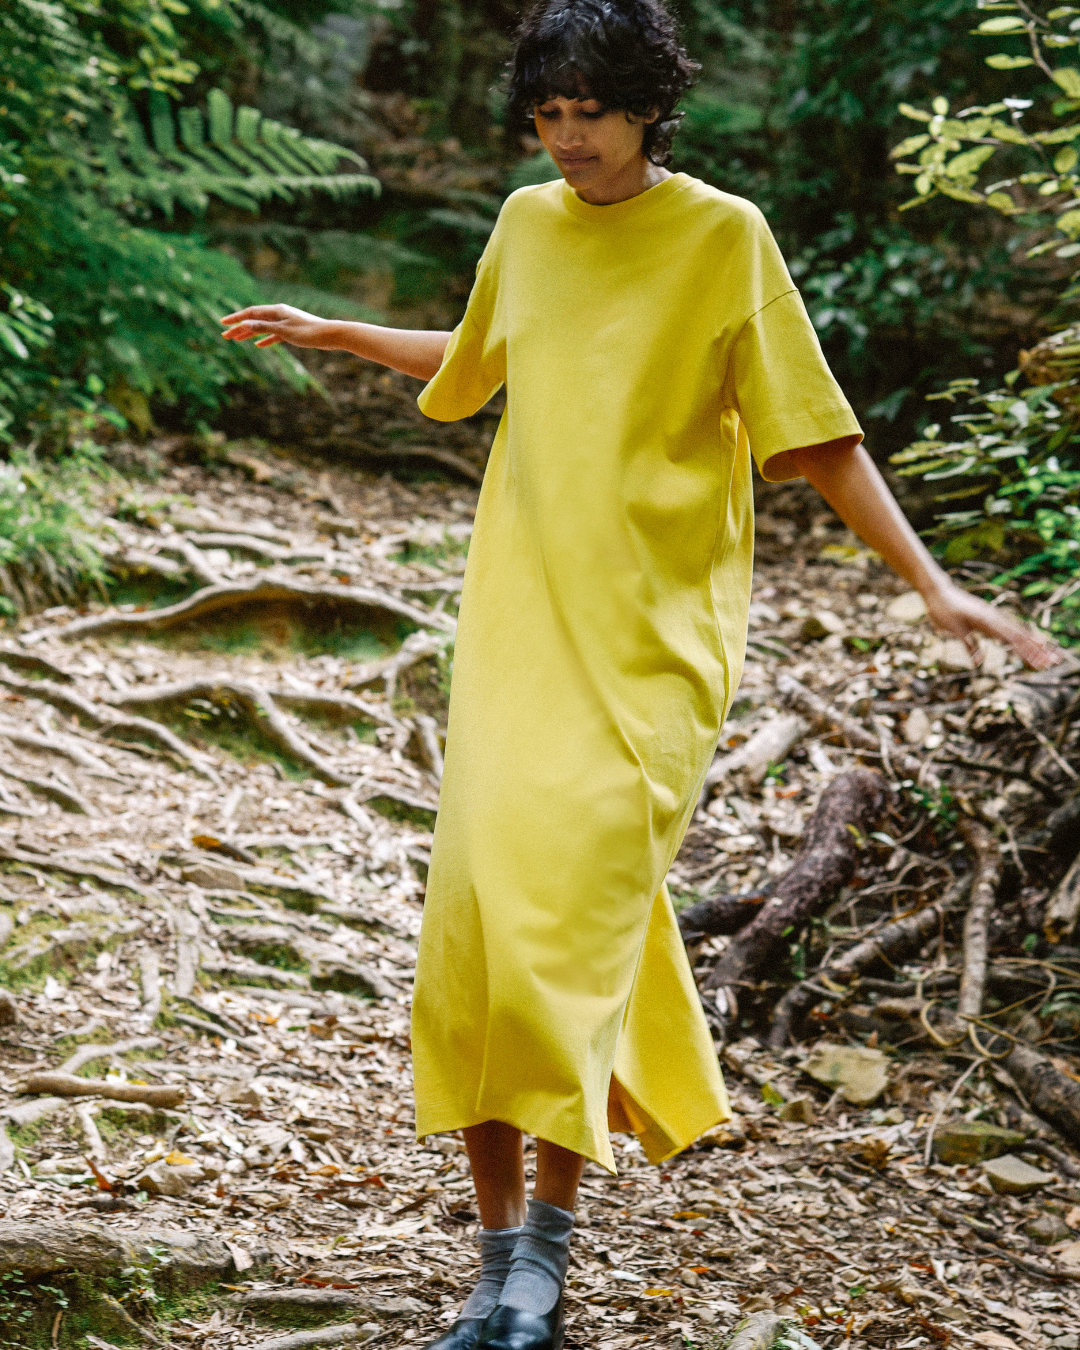 Woman wearing a yellow dress in forrest